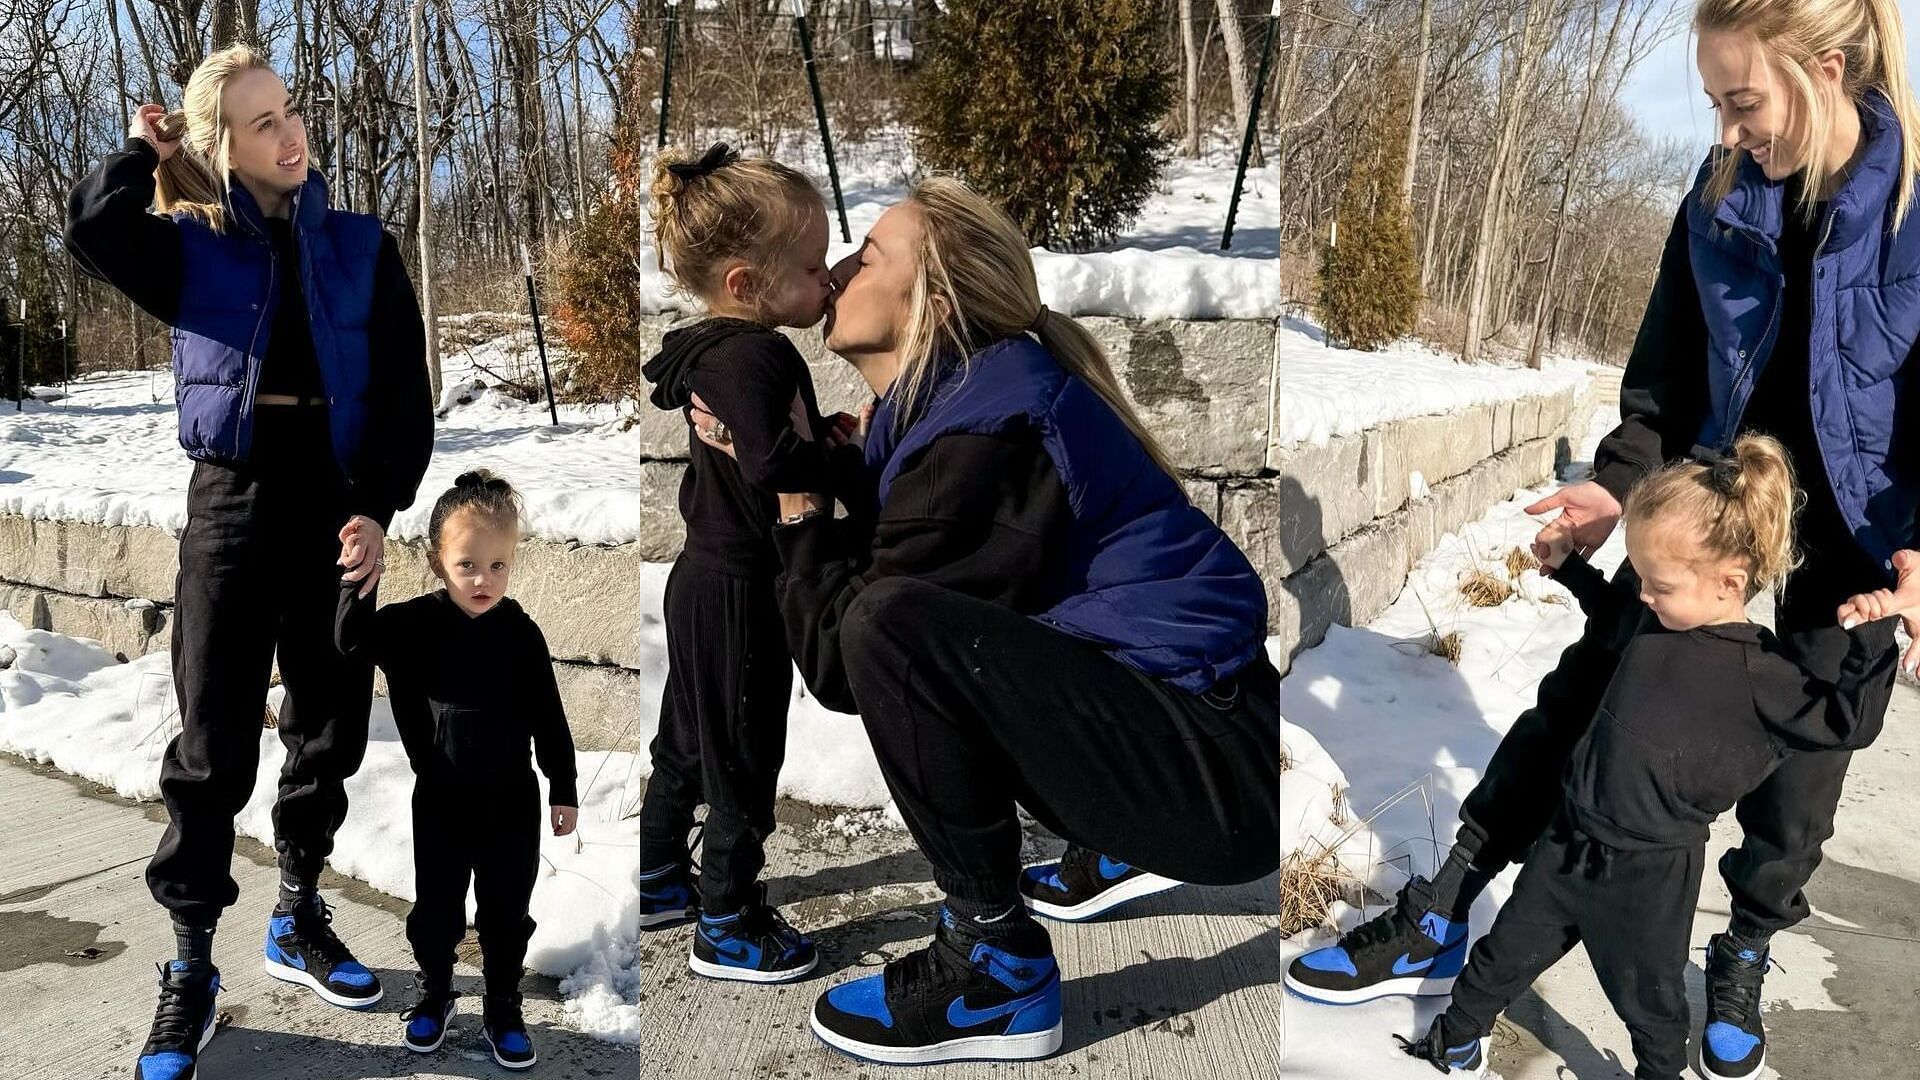 Brittany Mahomes and her daughter, Sterling Skye, bonded by walking through snowy surfaces.